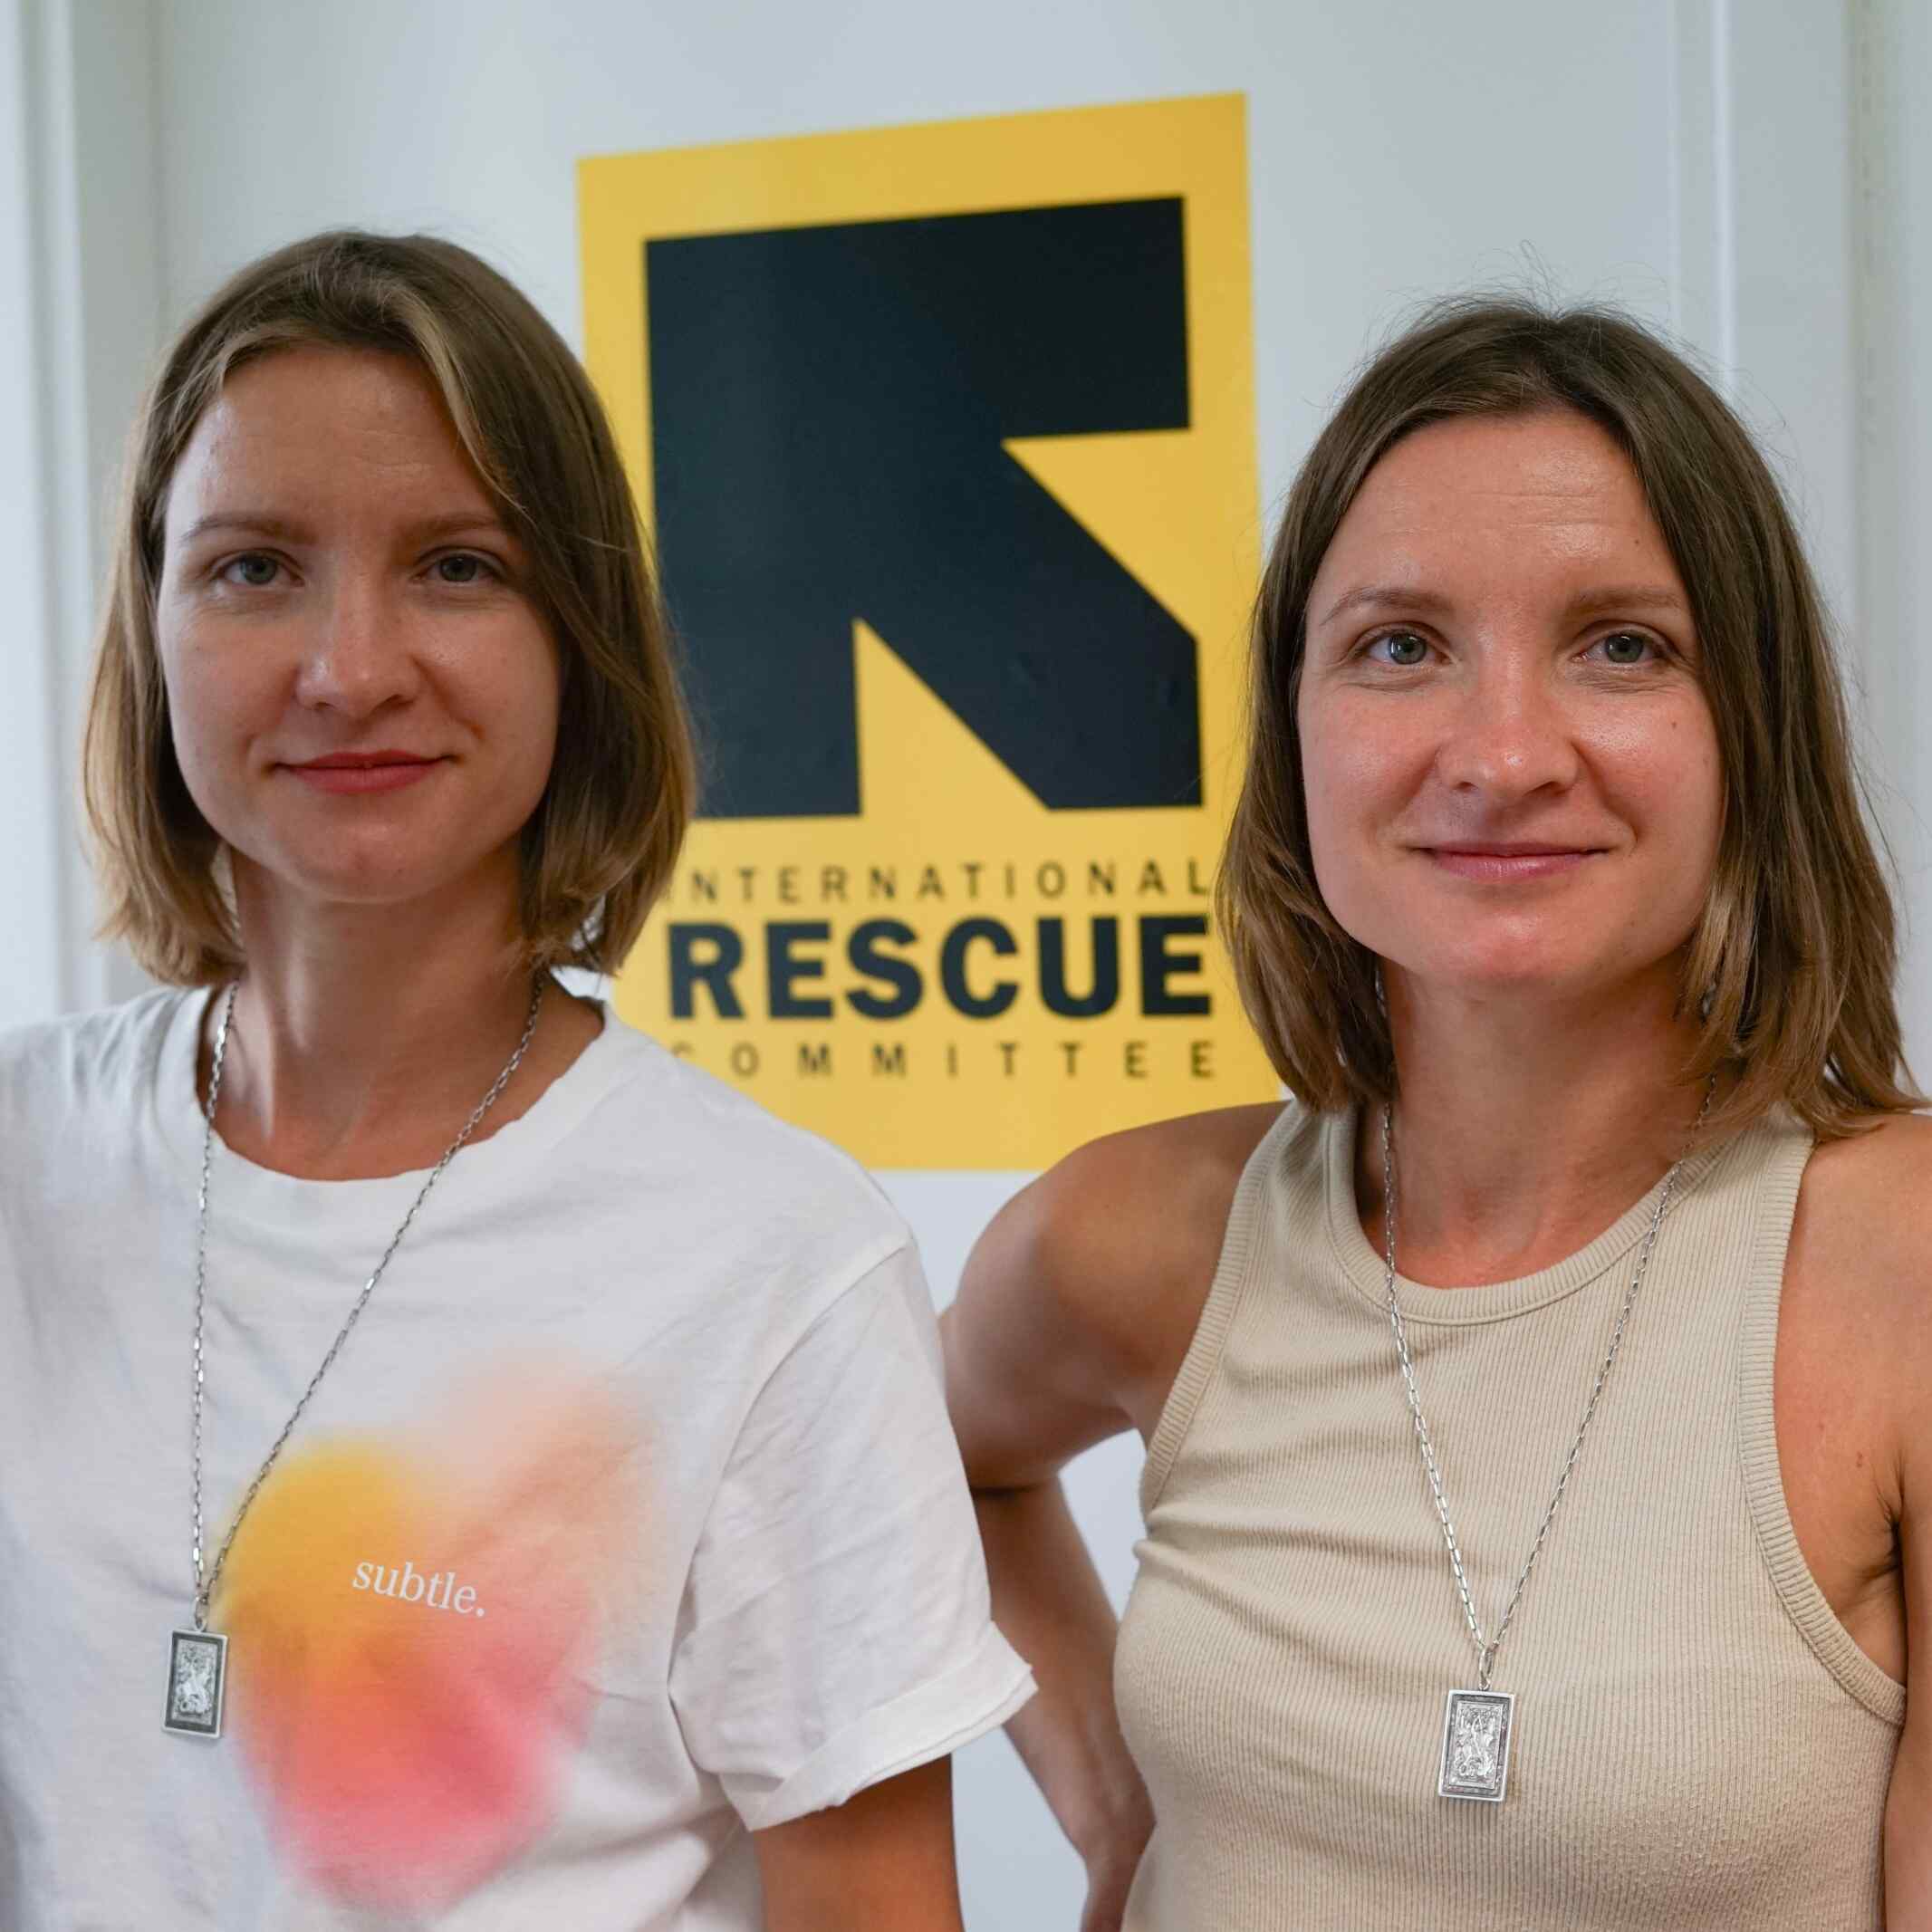 Ukrainian twins Maryana and Ruslana standing in front of the IRC logo